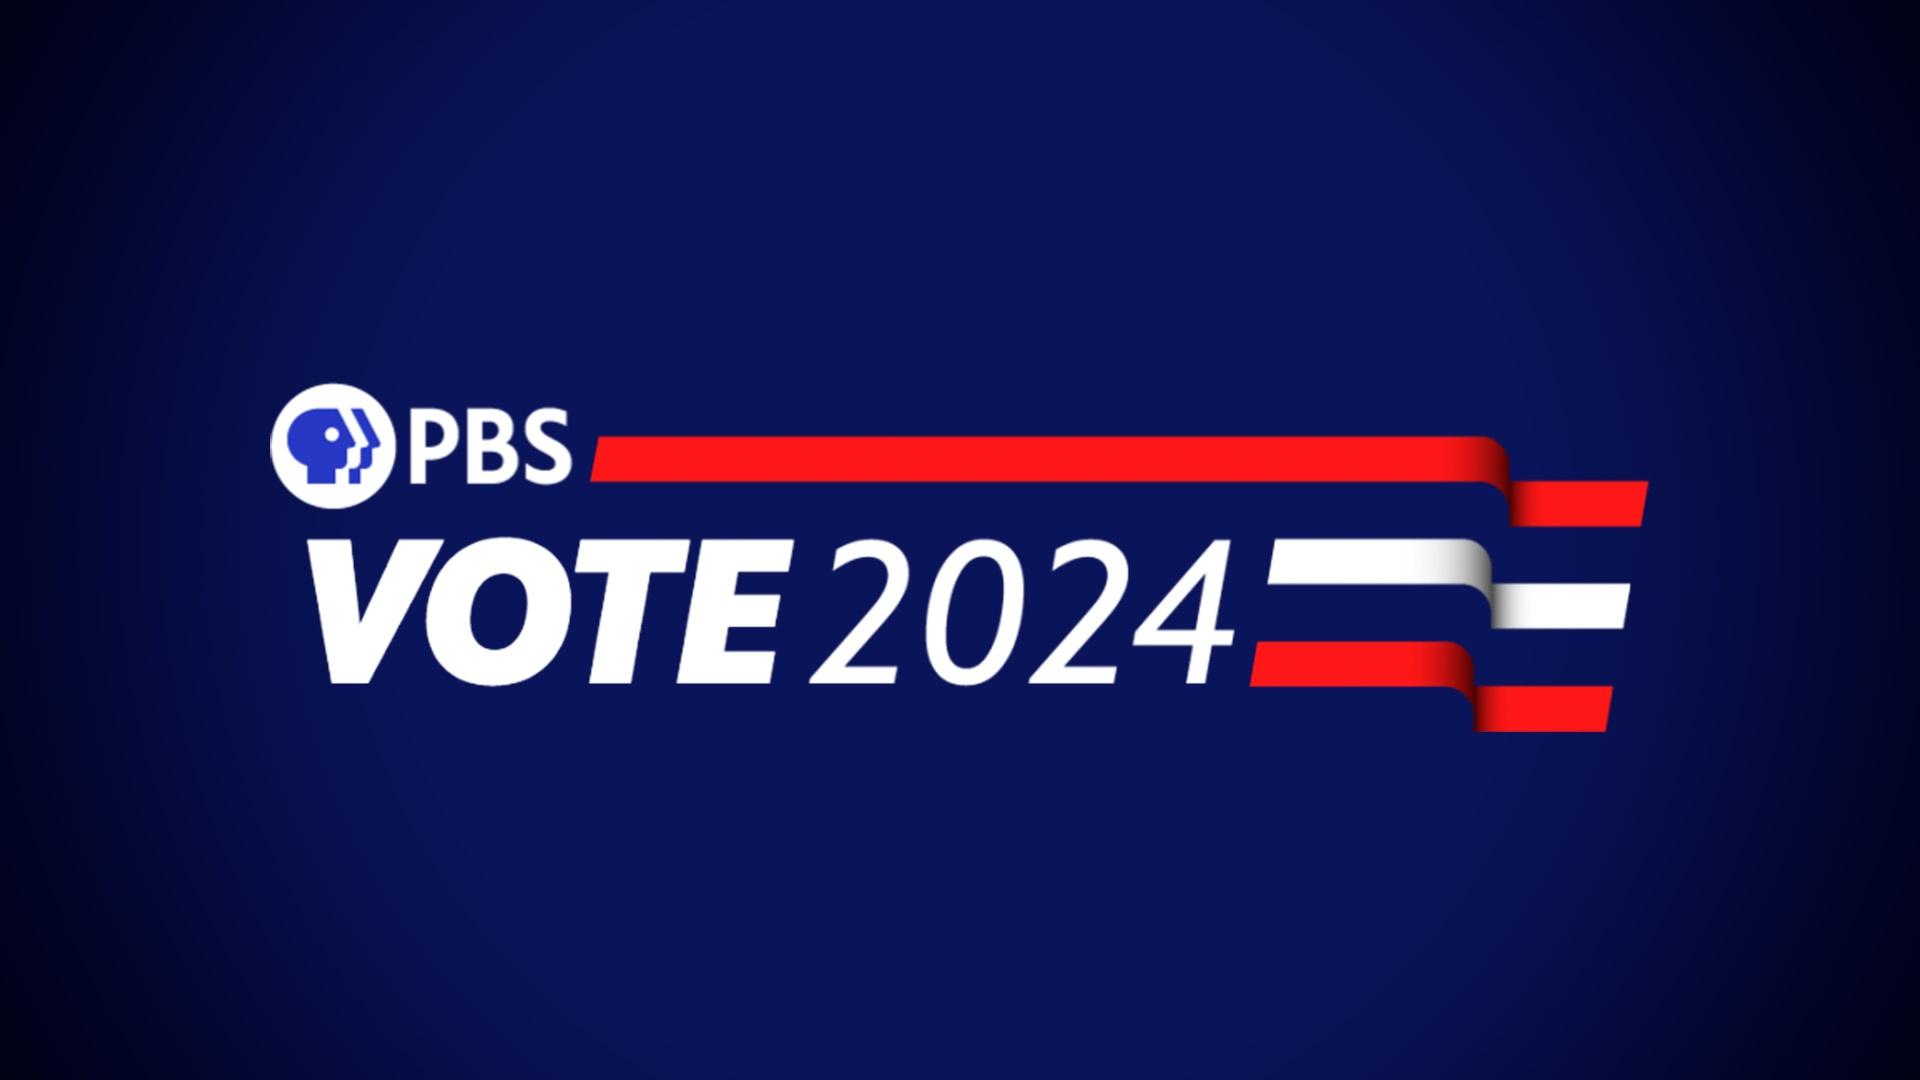 PBS logo and Vote 2024 graphic on a blue background with two red stripes and one white stripe